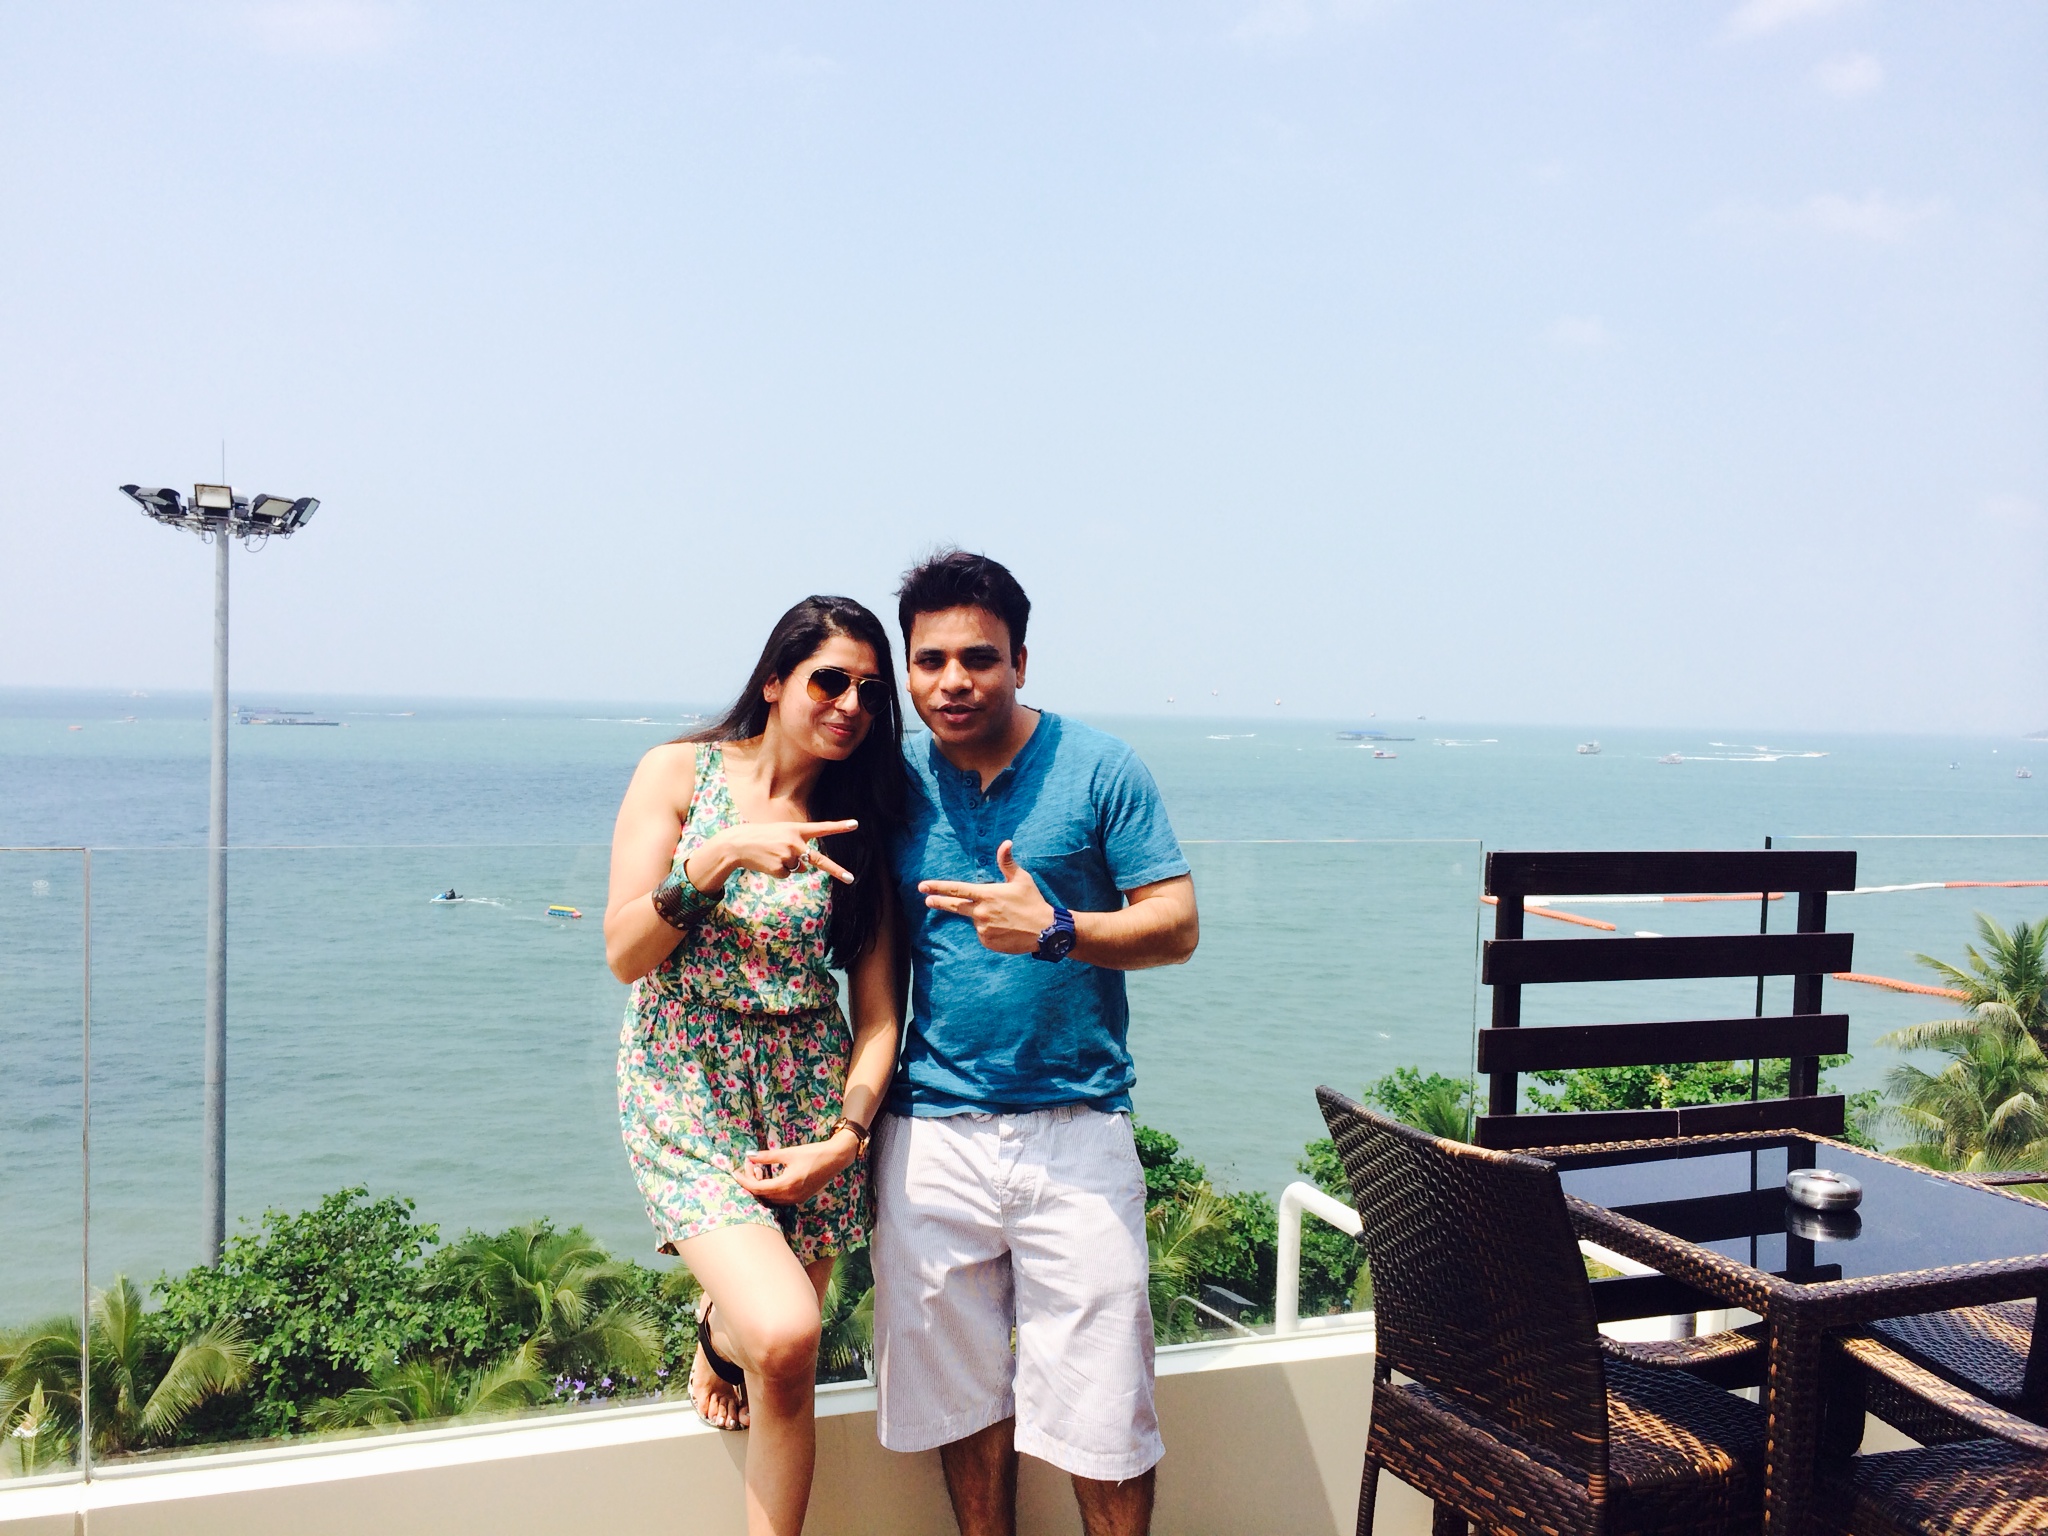 Day 1 & 2 - Short Trip To Pattaya With Sister : Thailand (Oct’14) 1